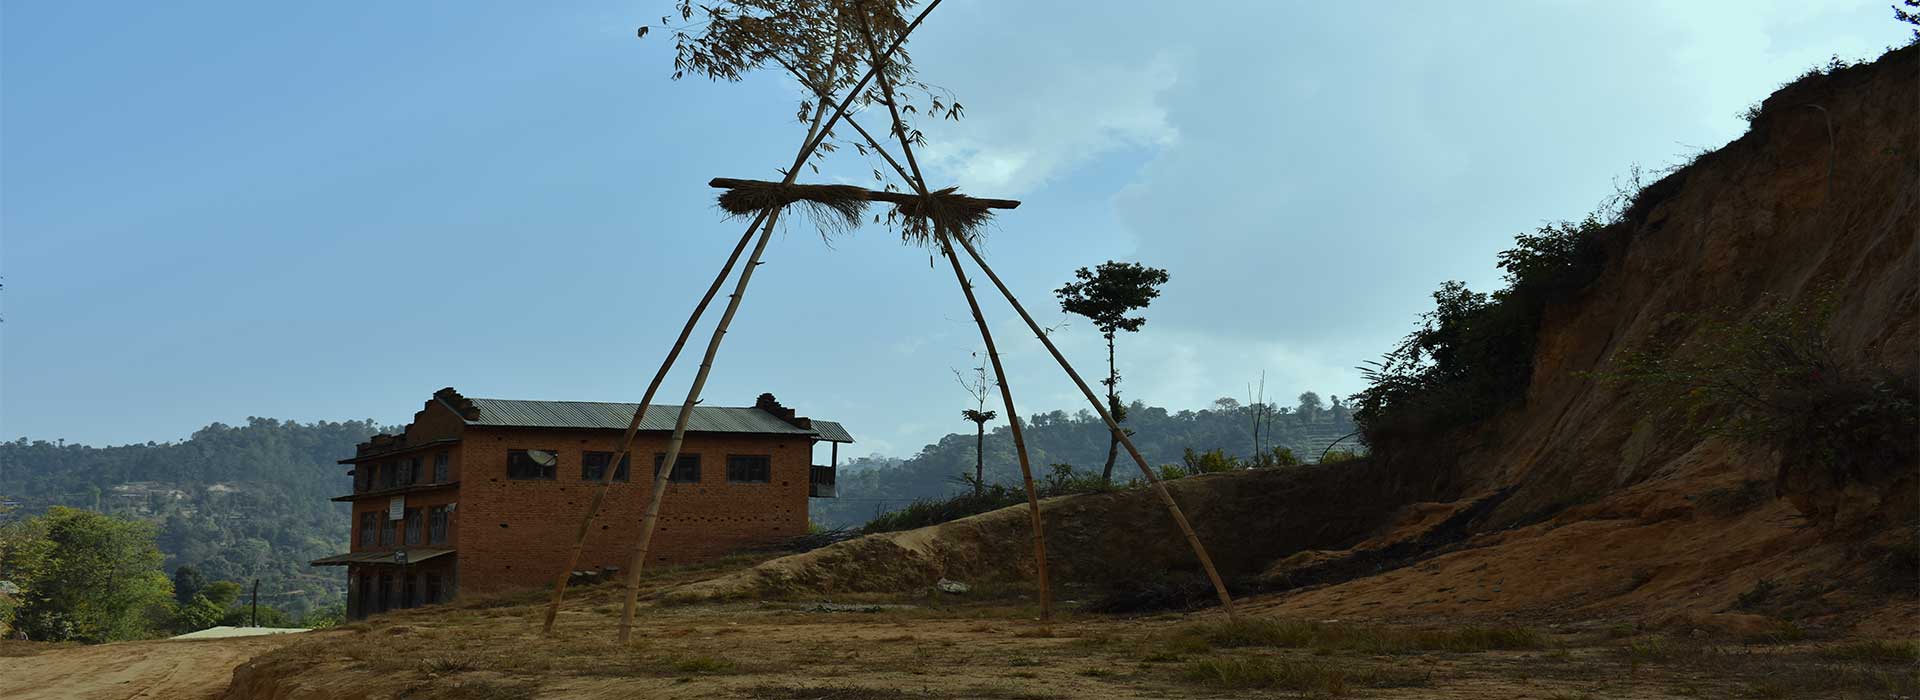 red mud house standing beside a bamboo swing in Nepali village